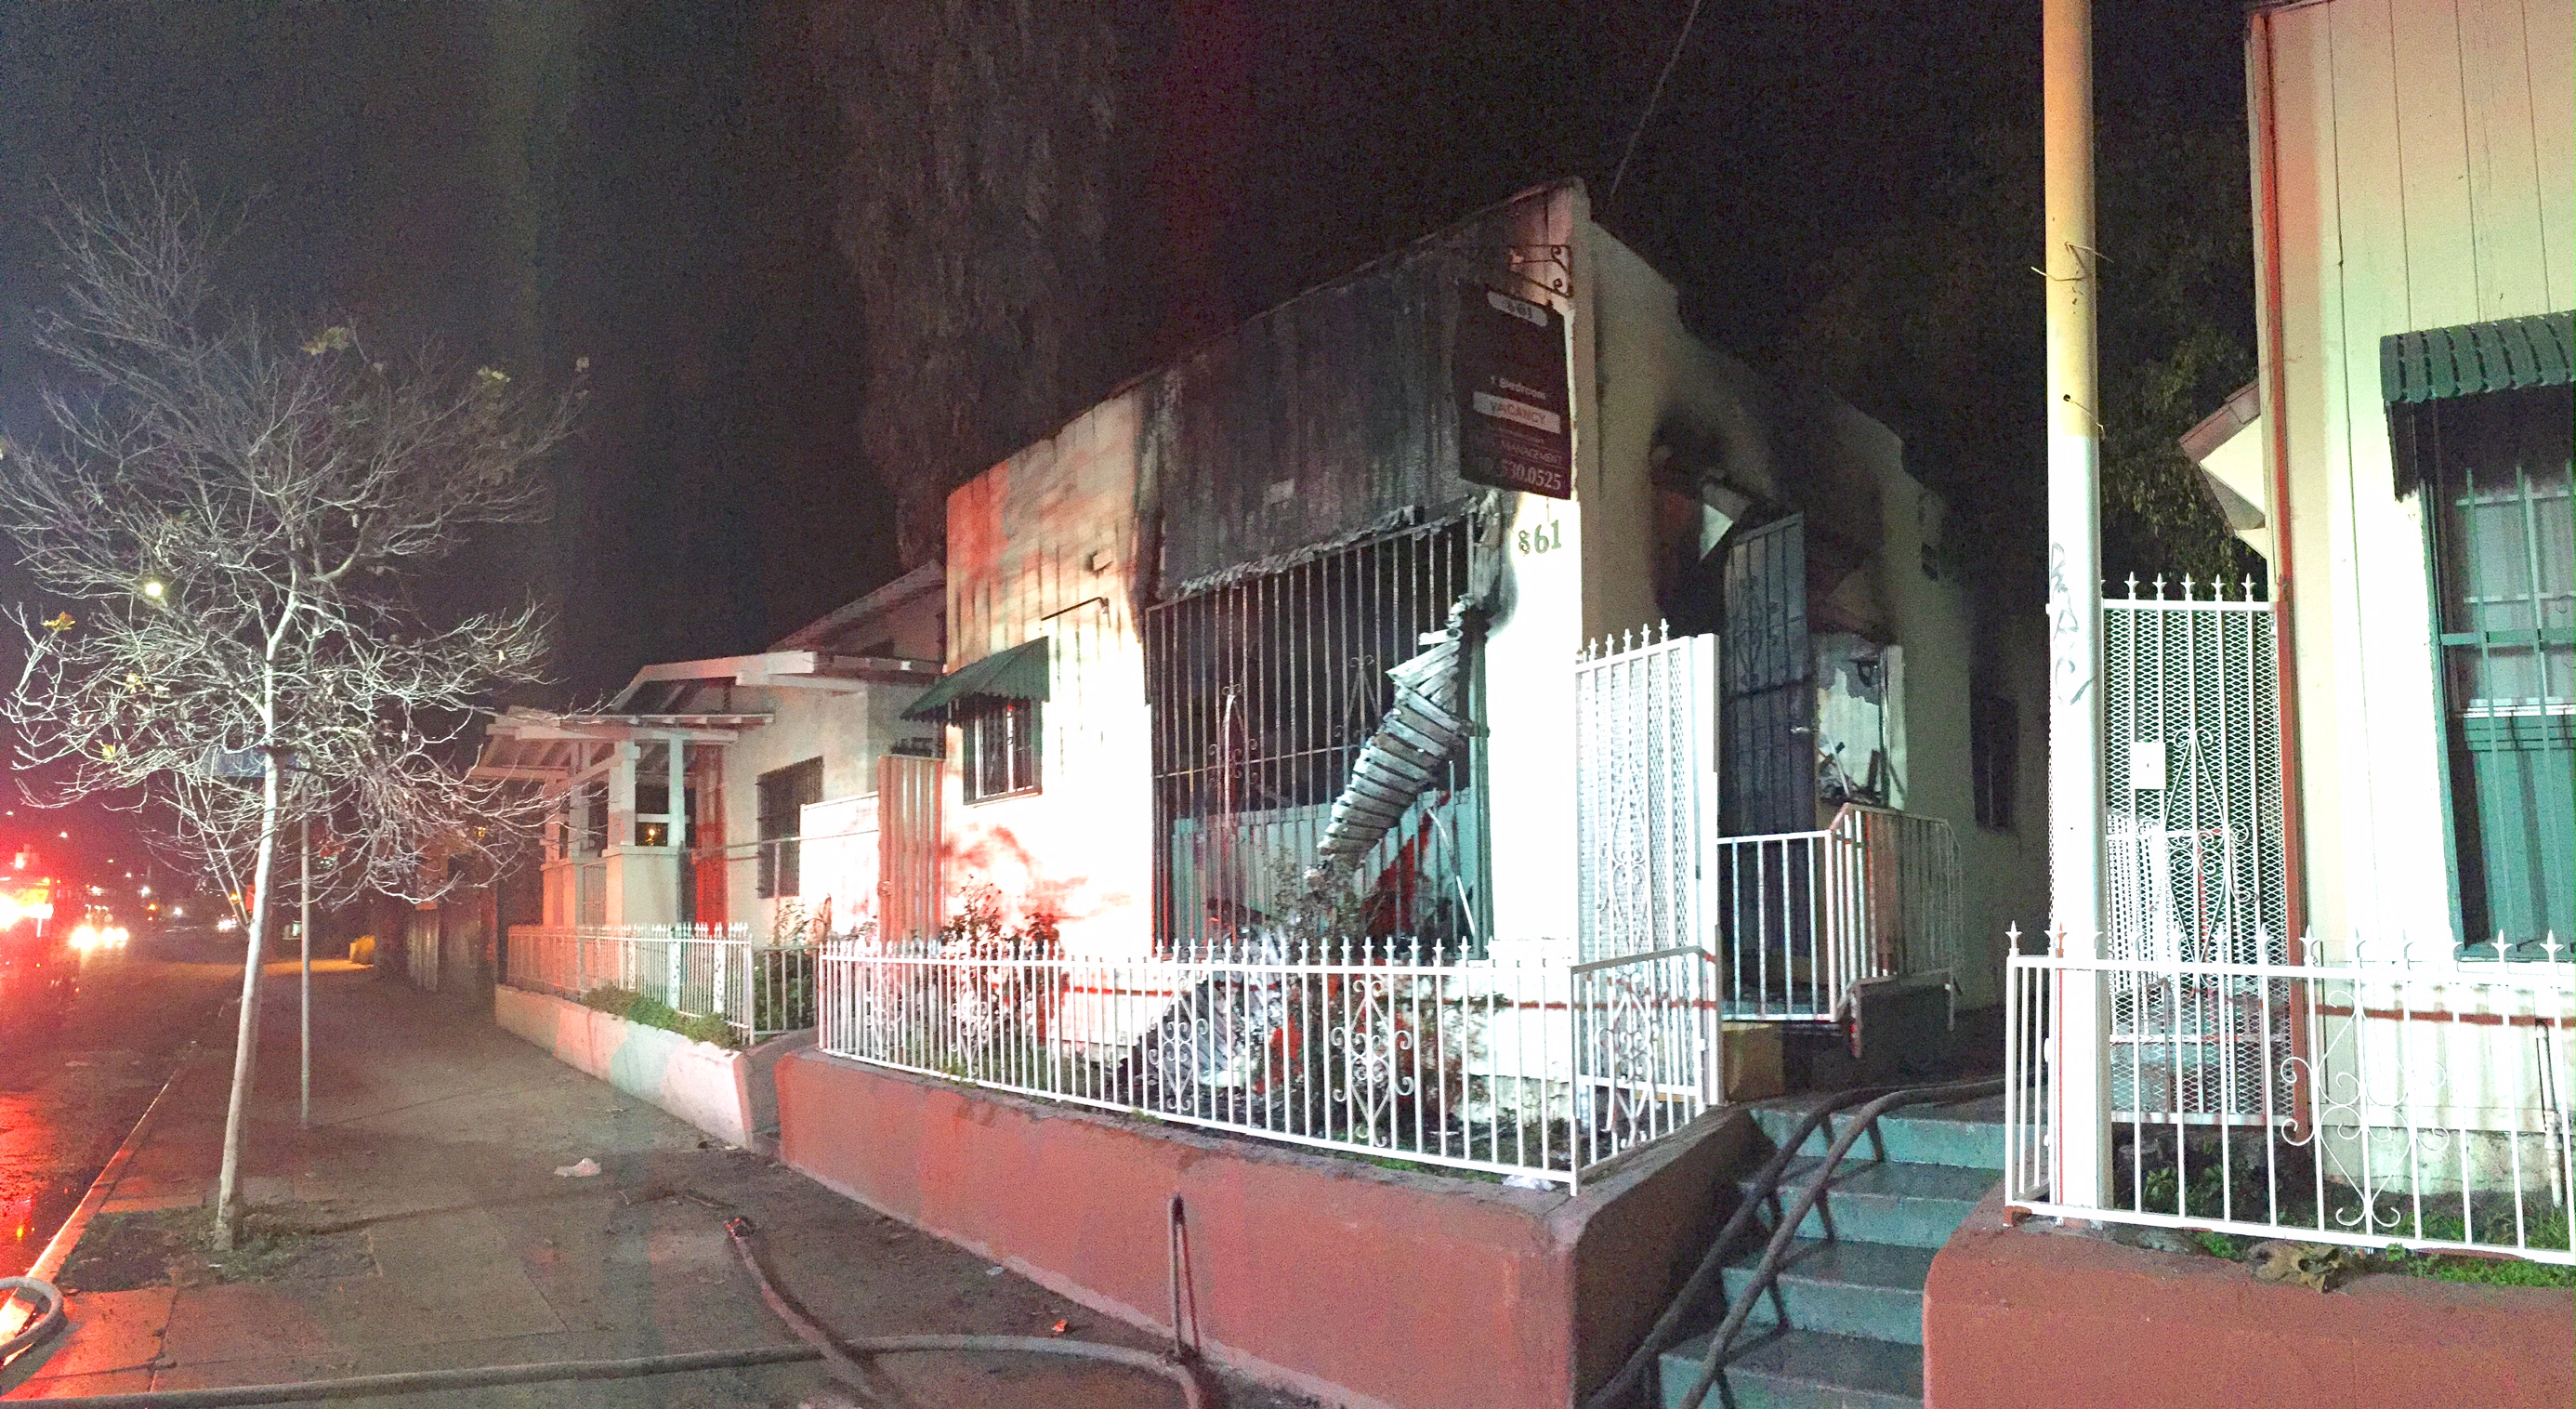 Aftermath of a January 16, 2017 greater alarm fire in South Los Angeles